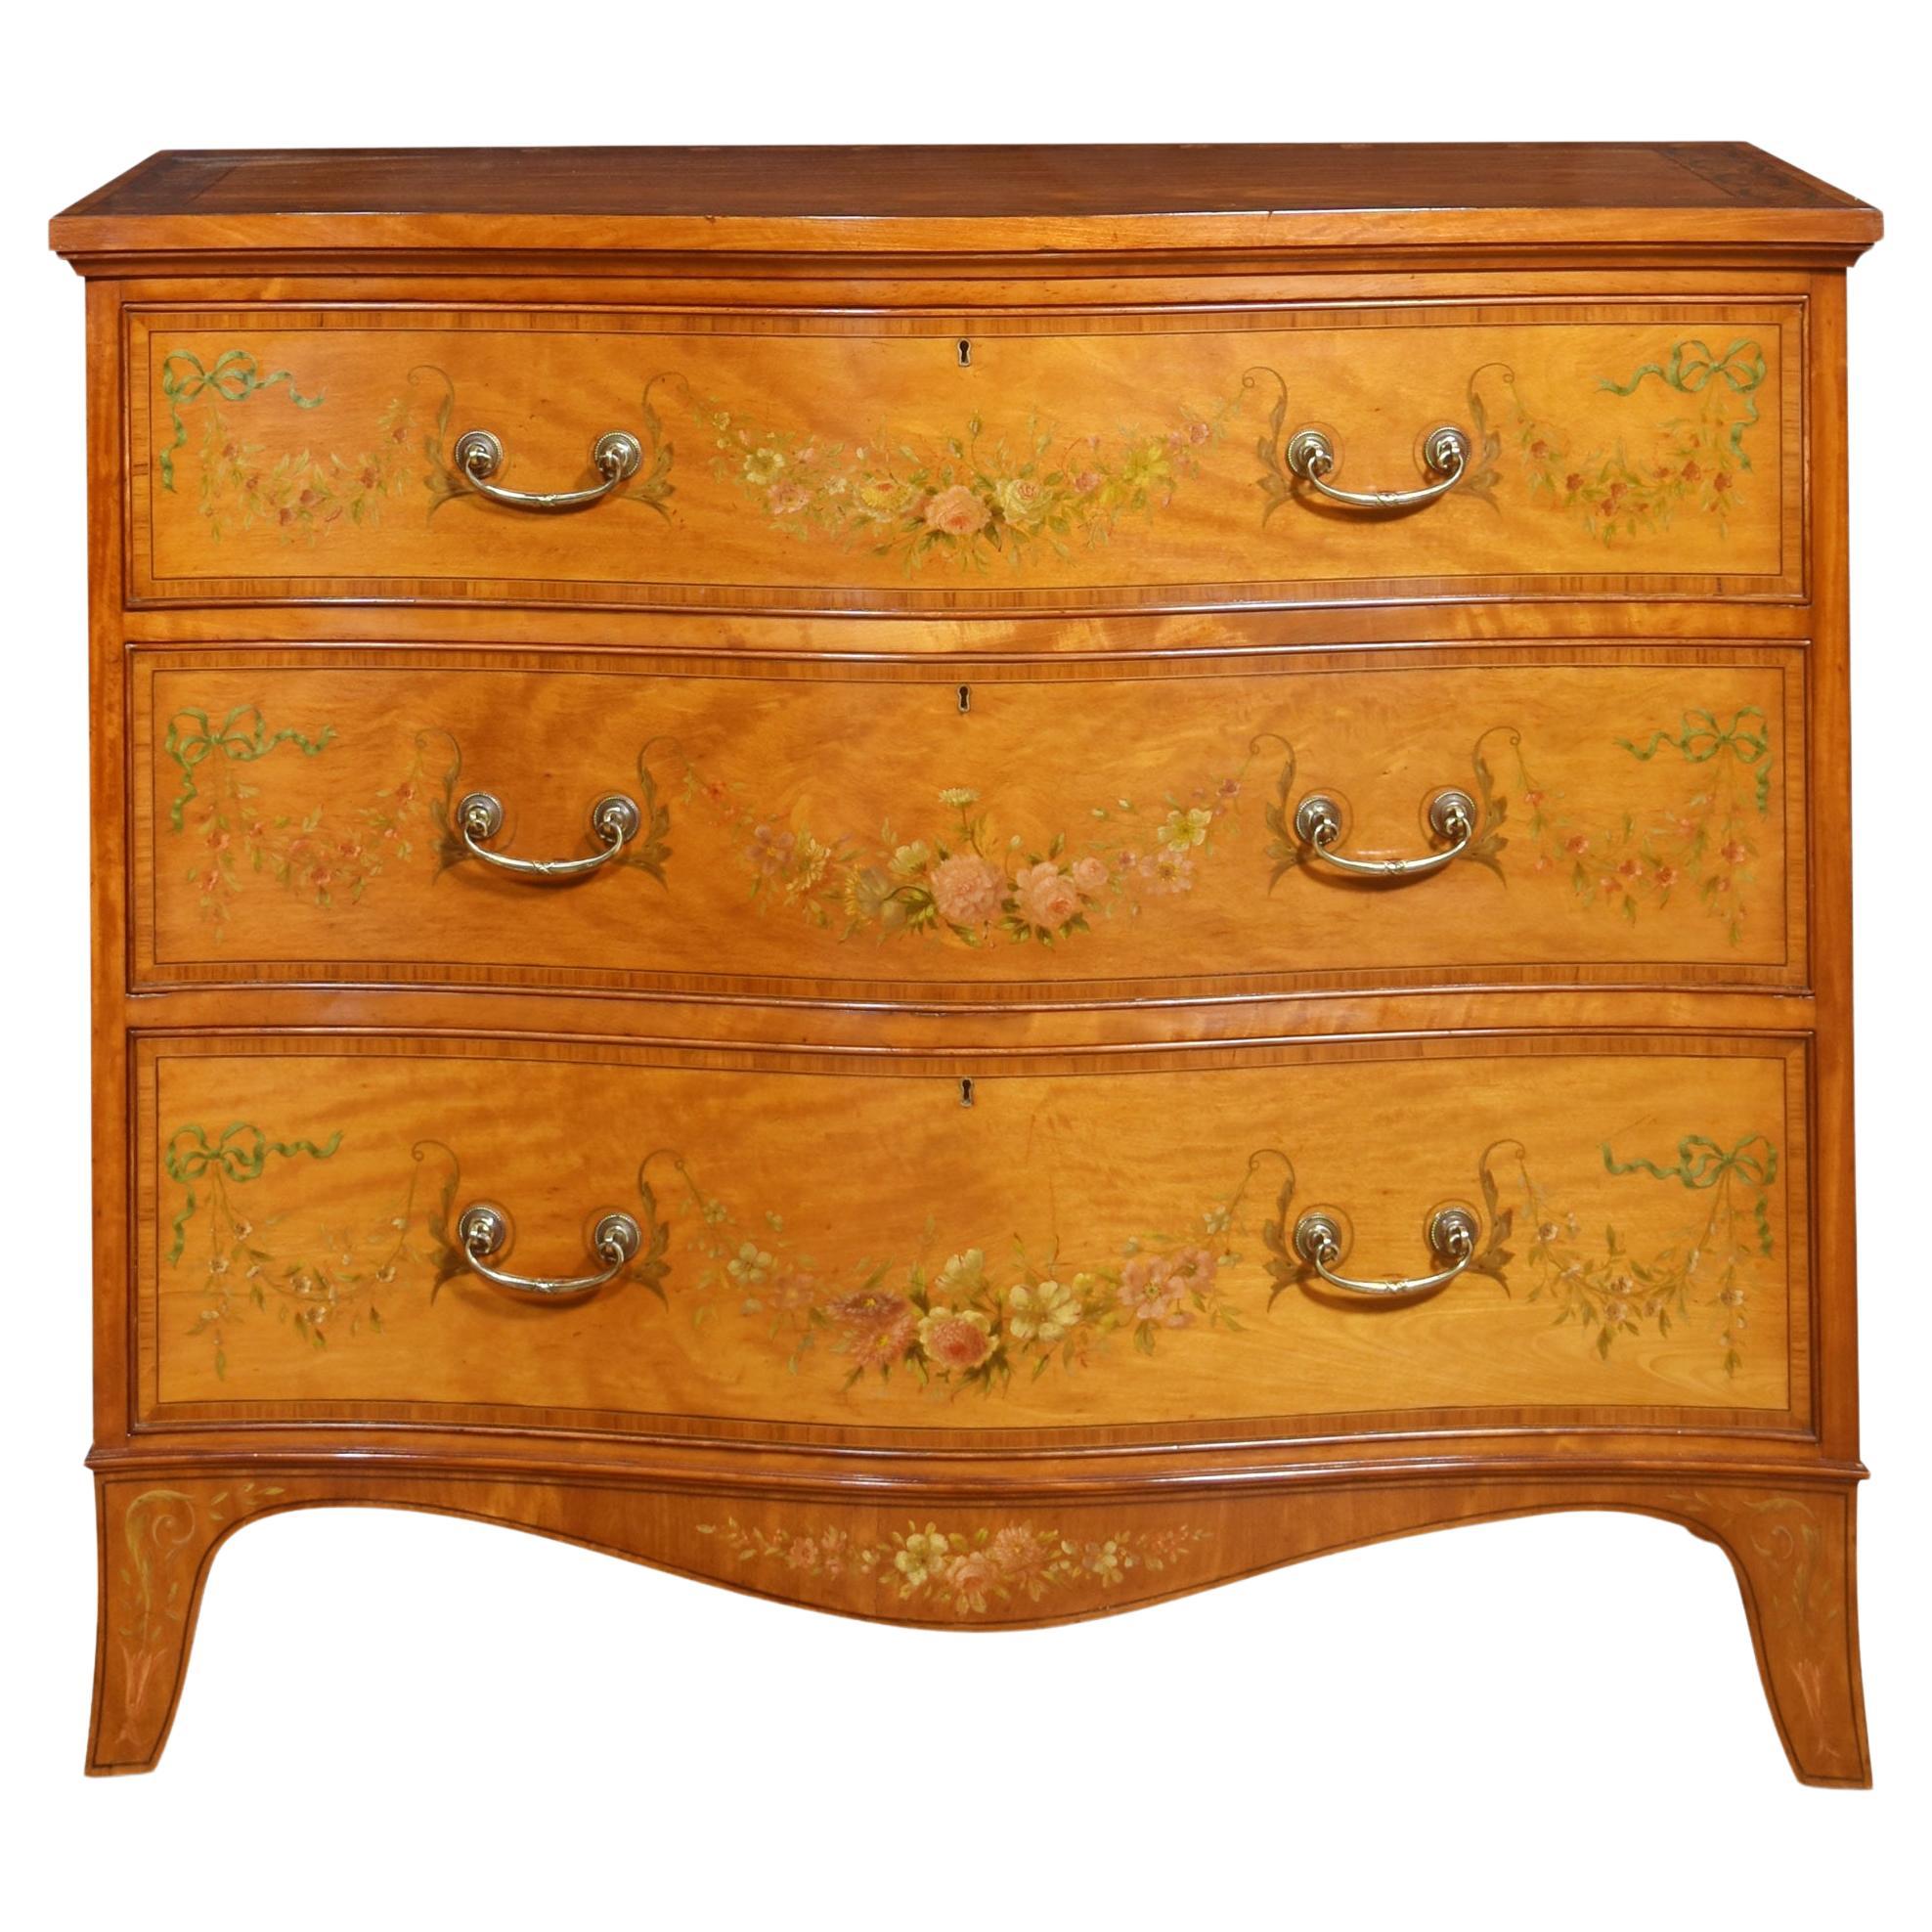 Painted satinwood serpentine chest of drawers